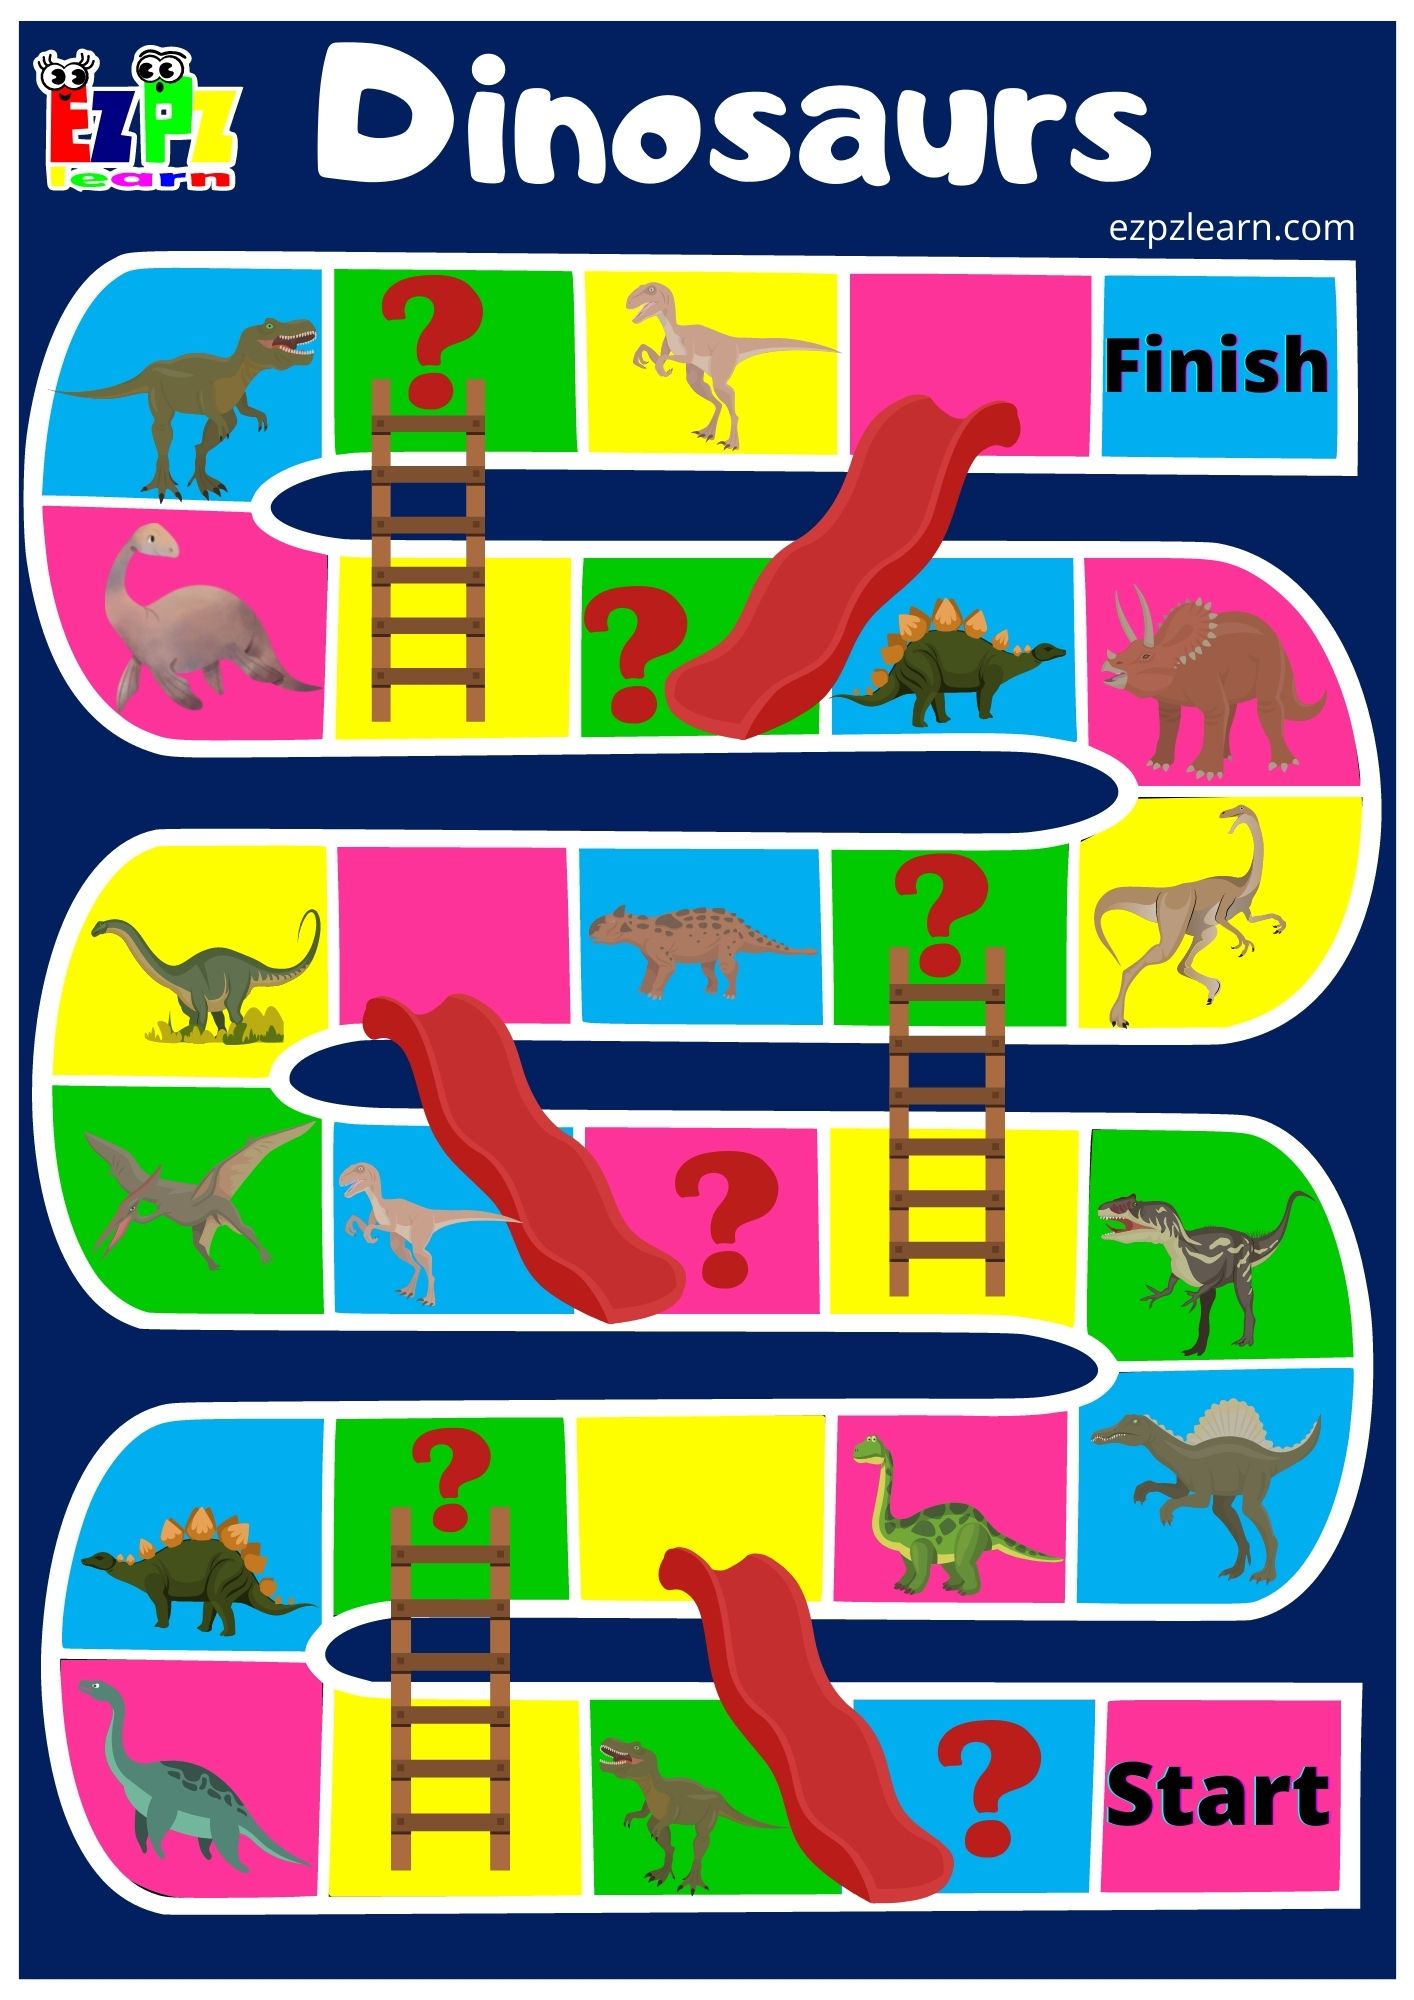 dinosaurs-slides-and-ladders-game-ezpzlearn